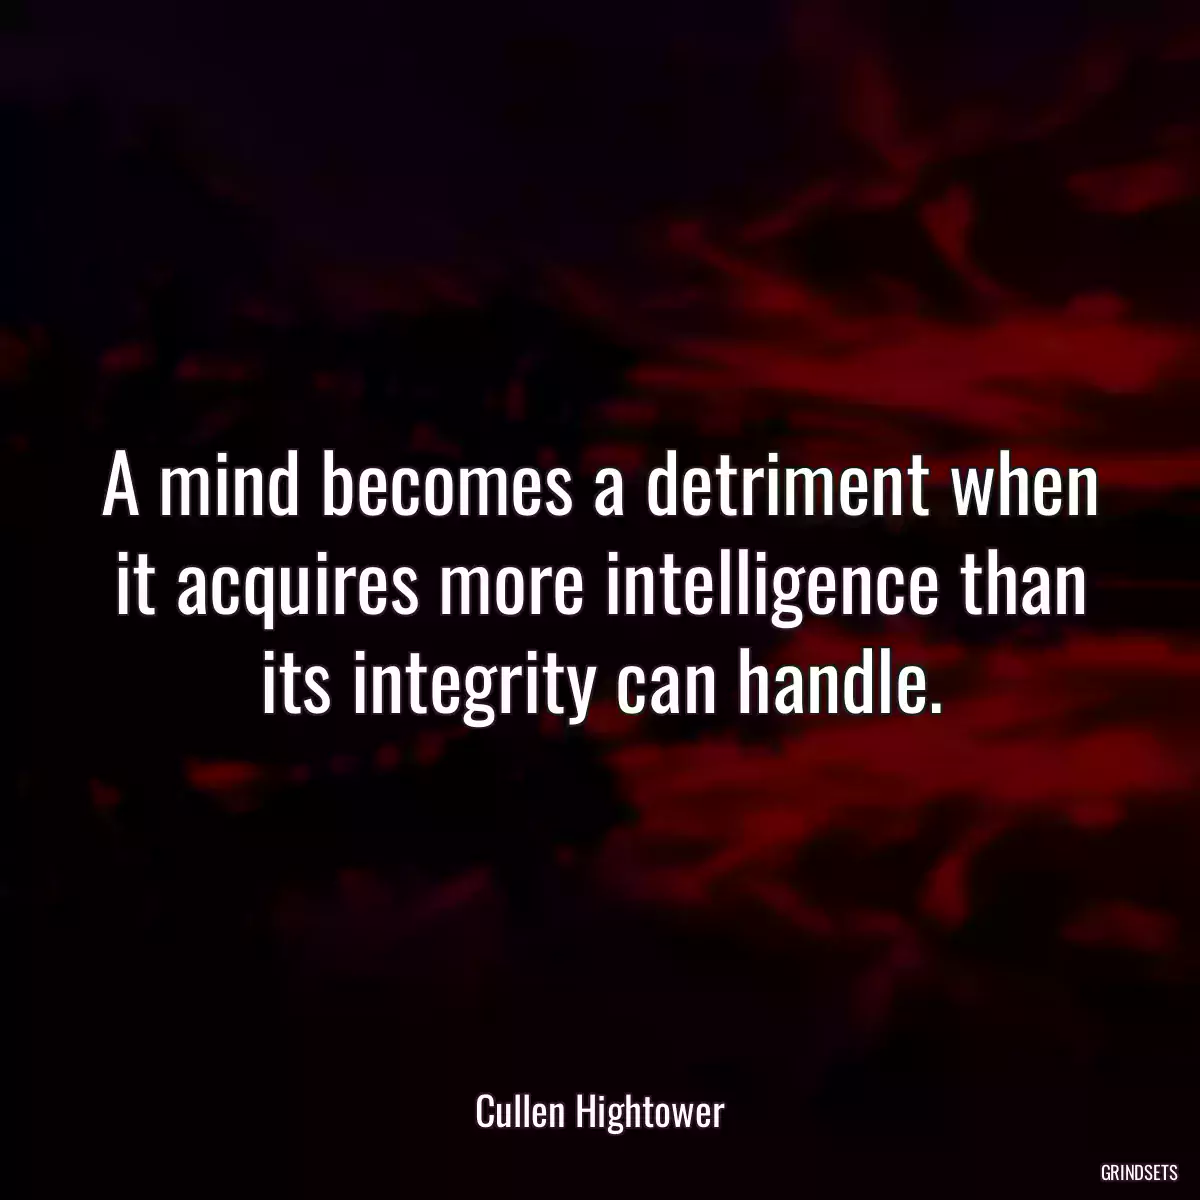 A mind becomes a detriment when it acquires more intelligence than its integrity can handle.